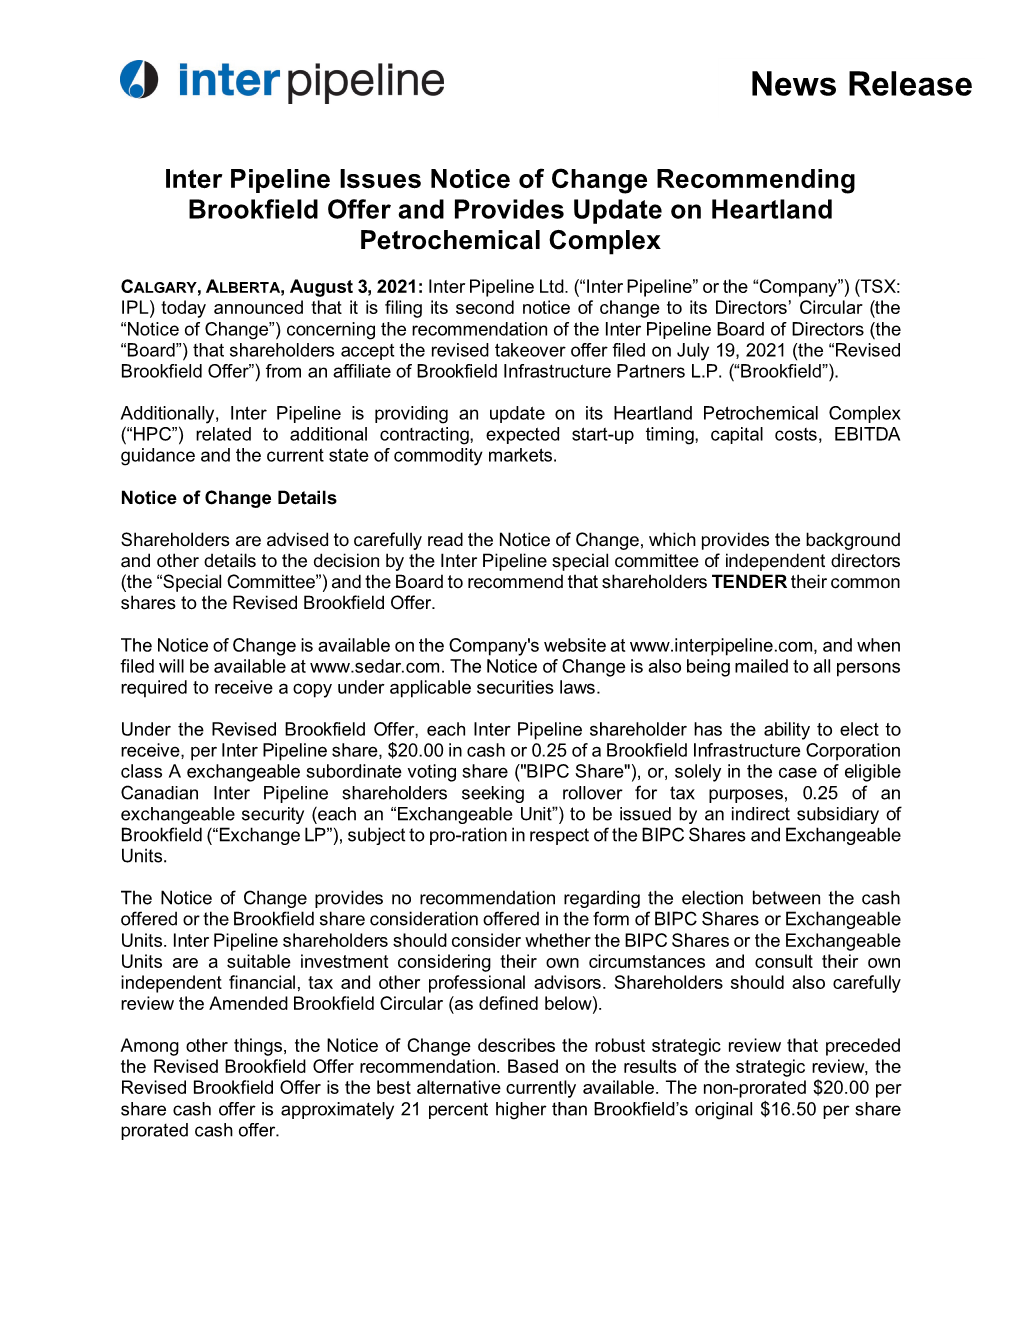 News Release Inter Pipeline Issues Notice of Change Recommending